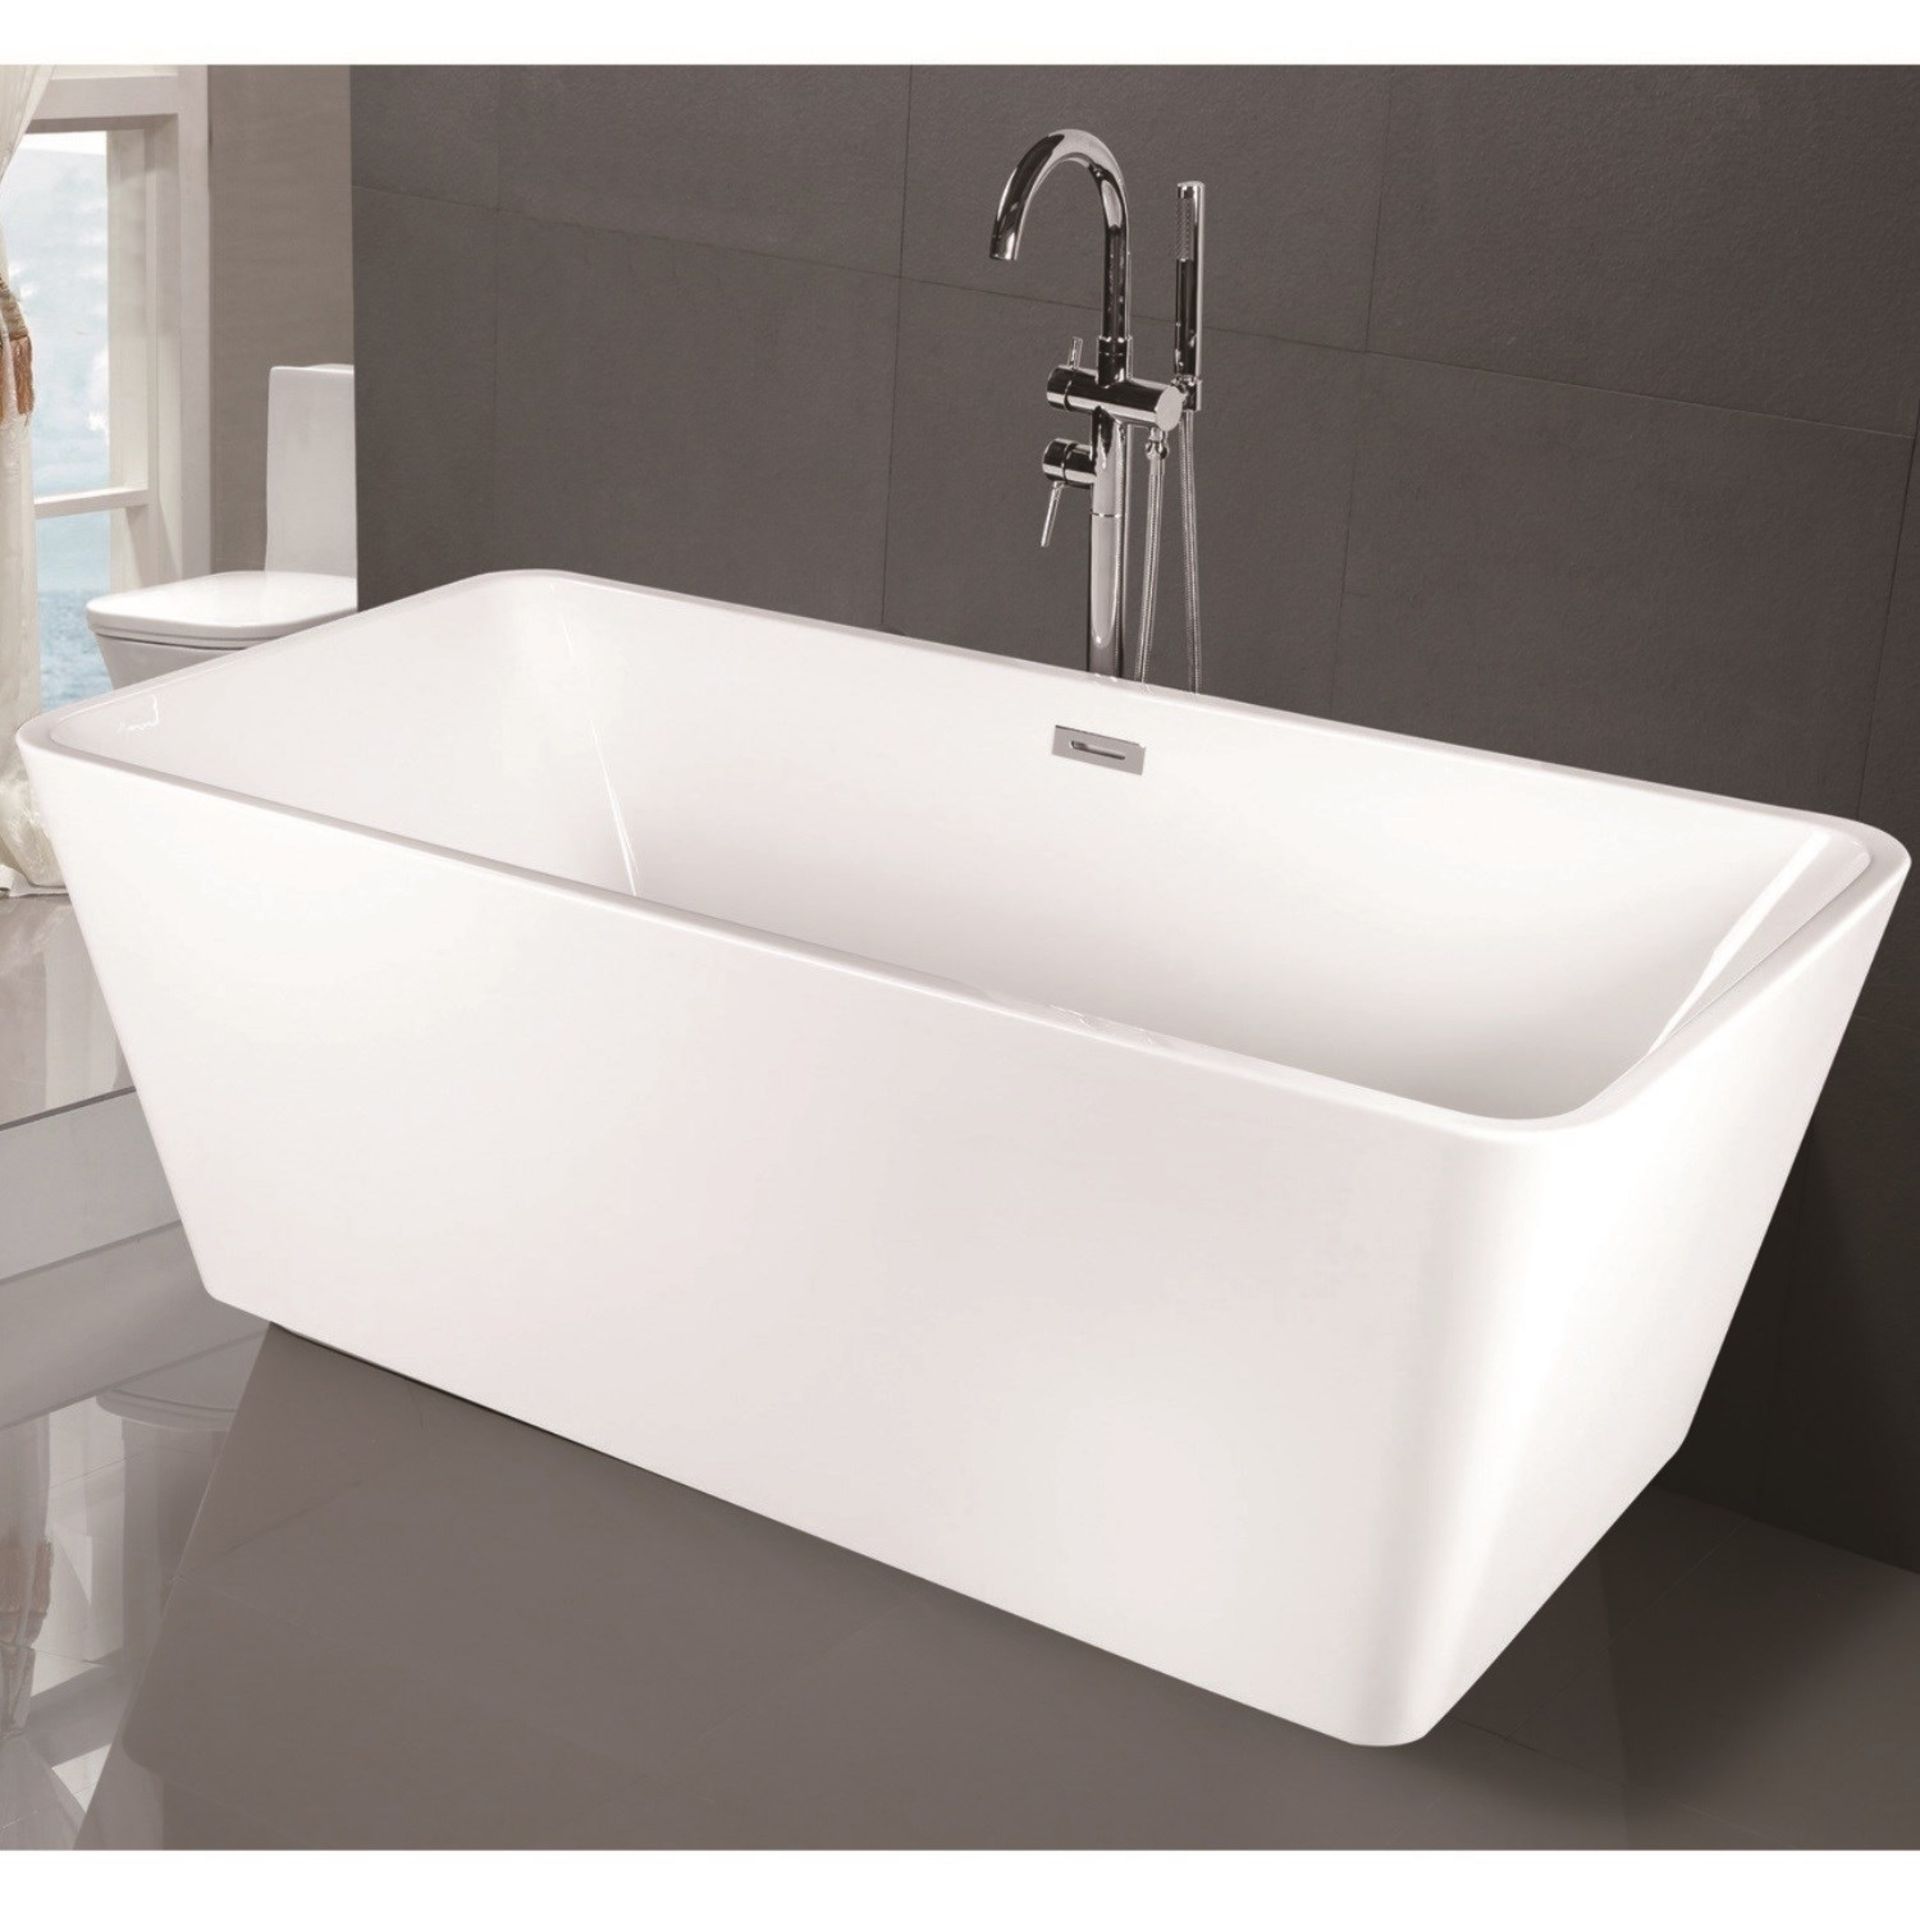 NEW (M5) 1600x800mm Hoxton Freestanding Bath. RRP £2,999.As a result of precise design Hoxton... - Image 4 of 5